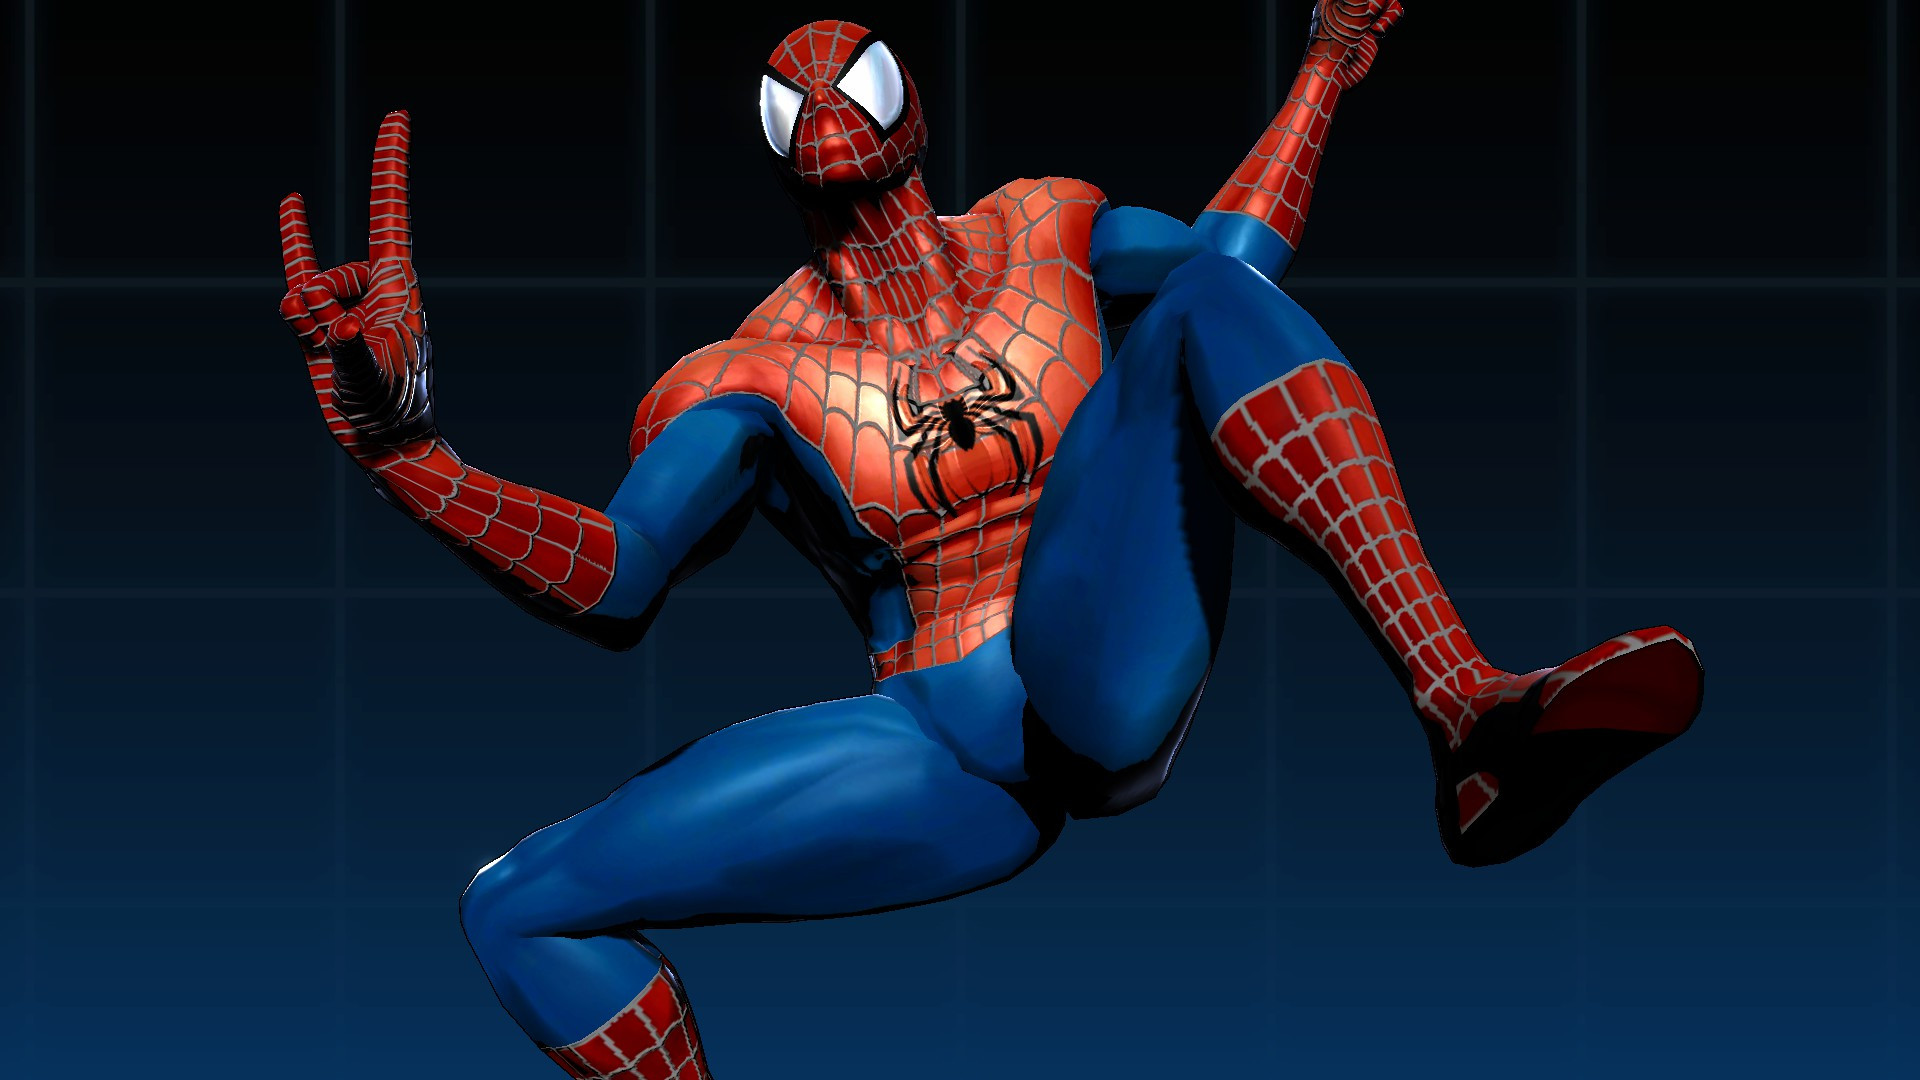 ultimate spider man game free